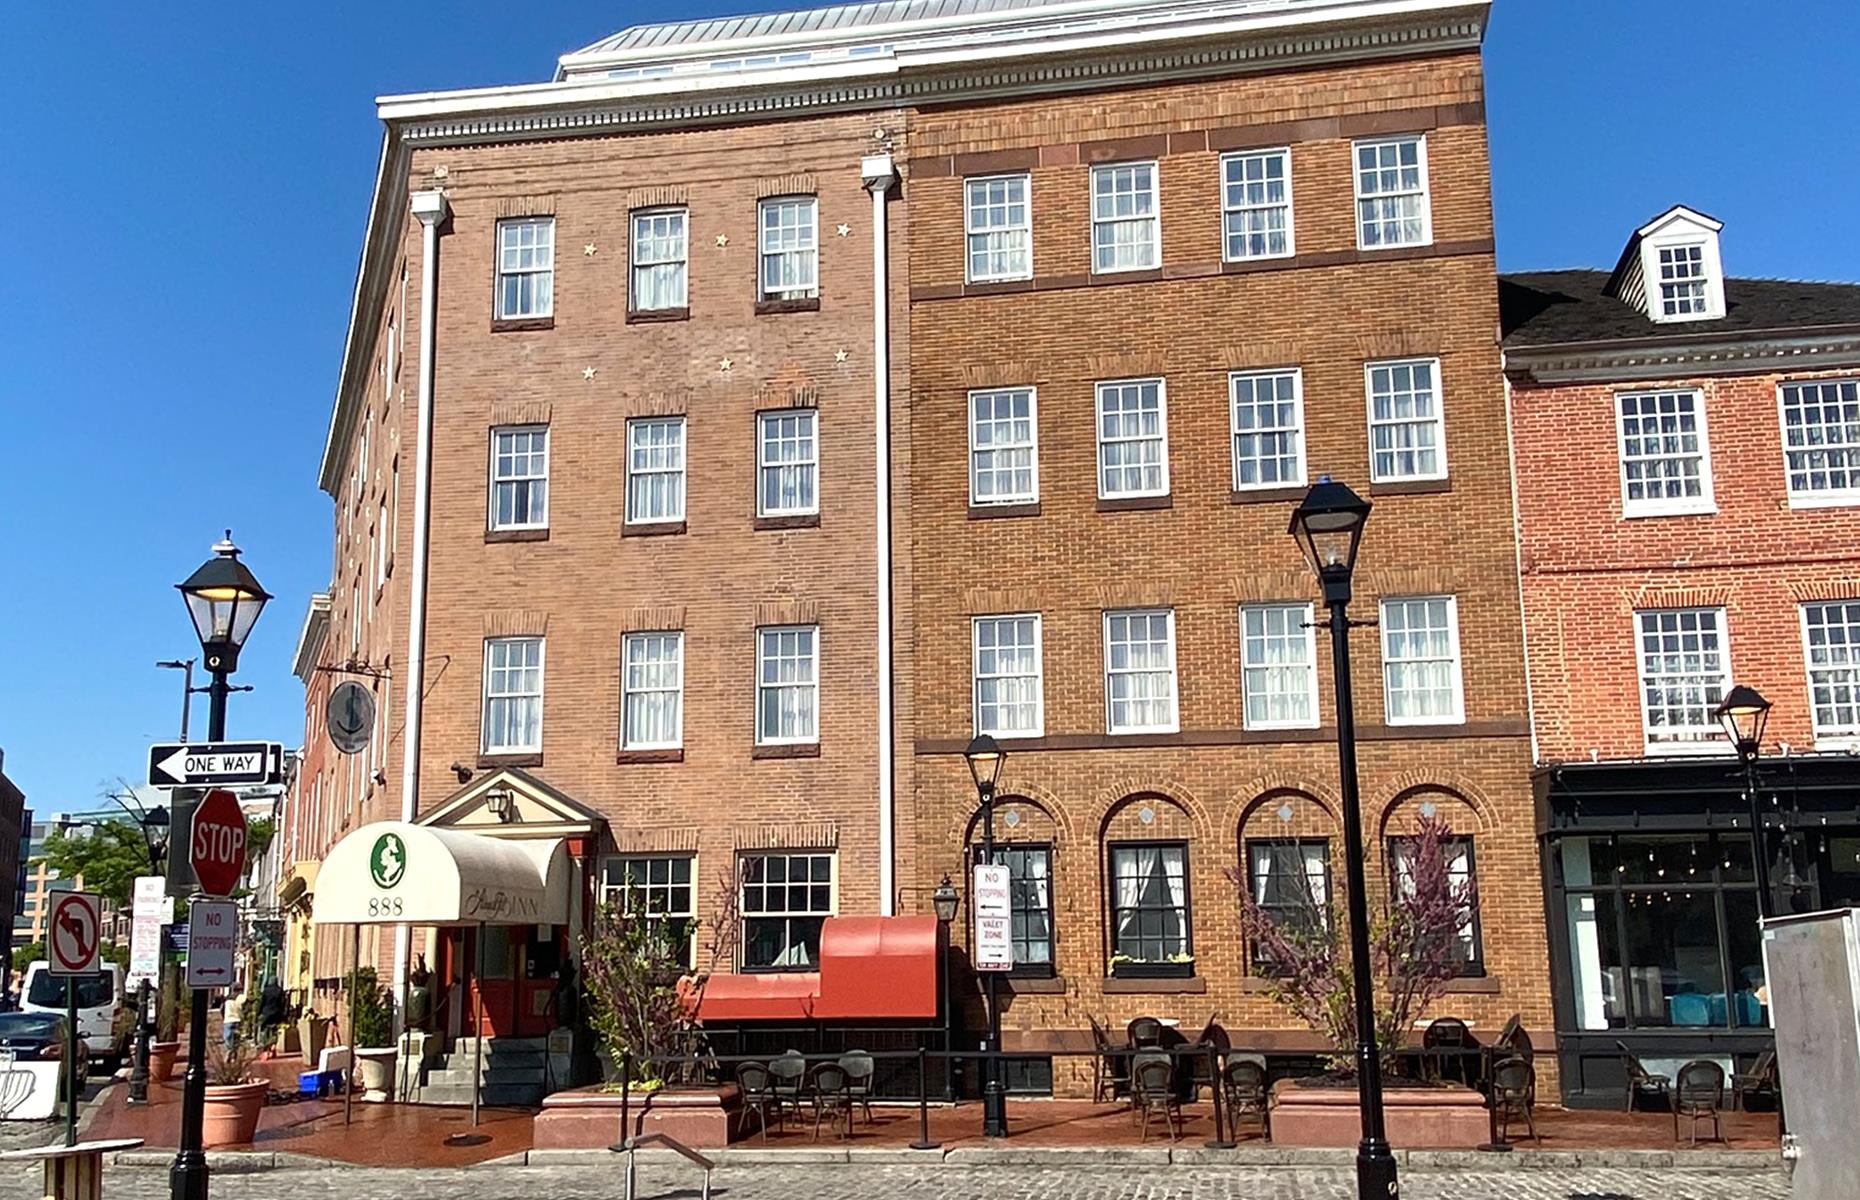 <p>Baltimore's Fell Point neighborhood has a long history and the <a href="https://www.admiralfell.com/">Admiral Fell Inn</a> has been a part of it for decades, beginning life as an anchorage and then a YMCA. It's been a boutique hotel since the 1980s but guests have still reported sightings of ghostly sailors floating around the inn. The property typically runs a ghost tour that includes a drink at the Tavern.</p>